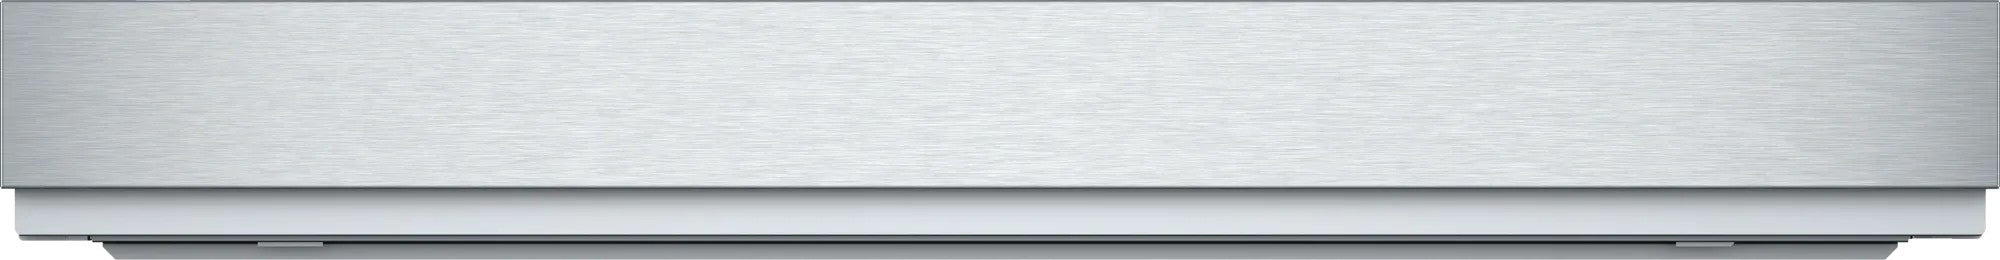 Thermador - 0.8 cu. ft Warming Drawer in Stainless - SDS30WC